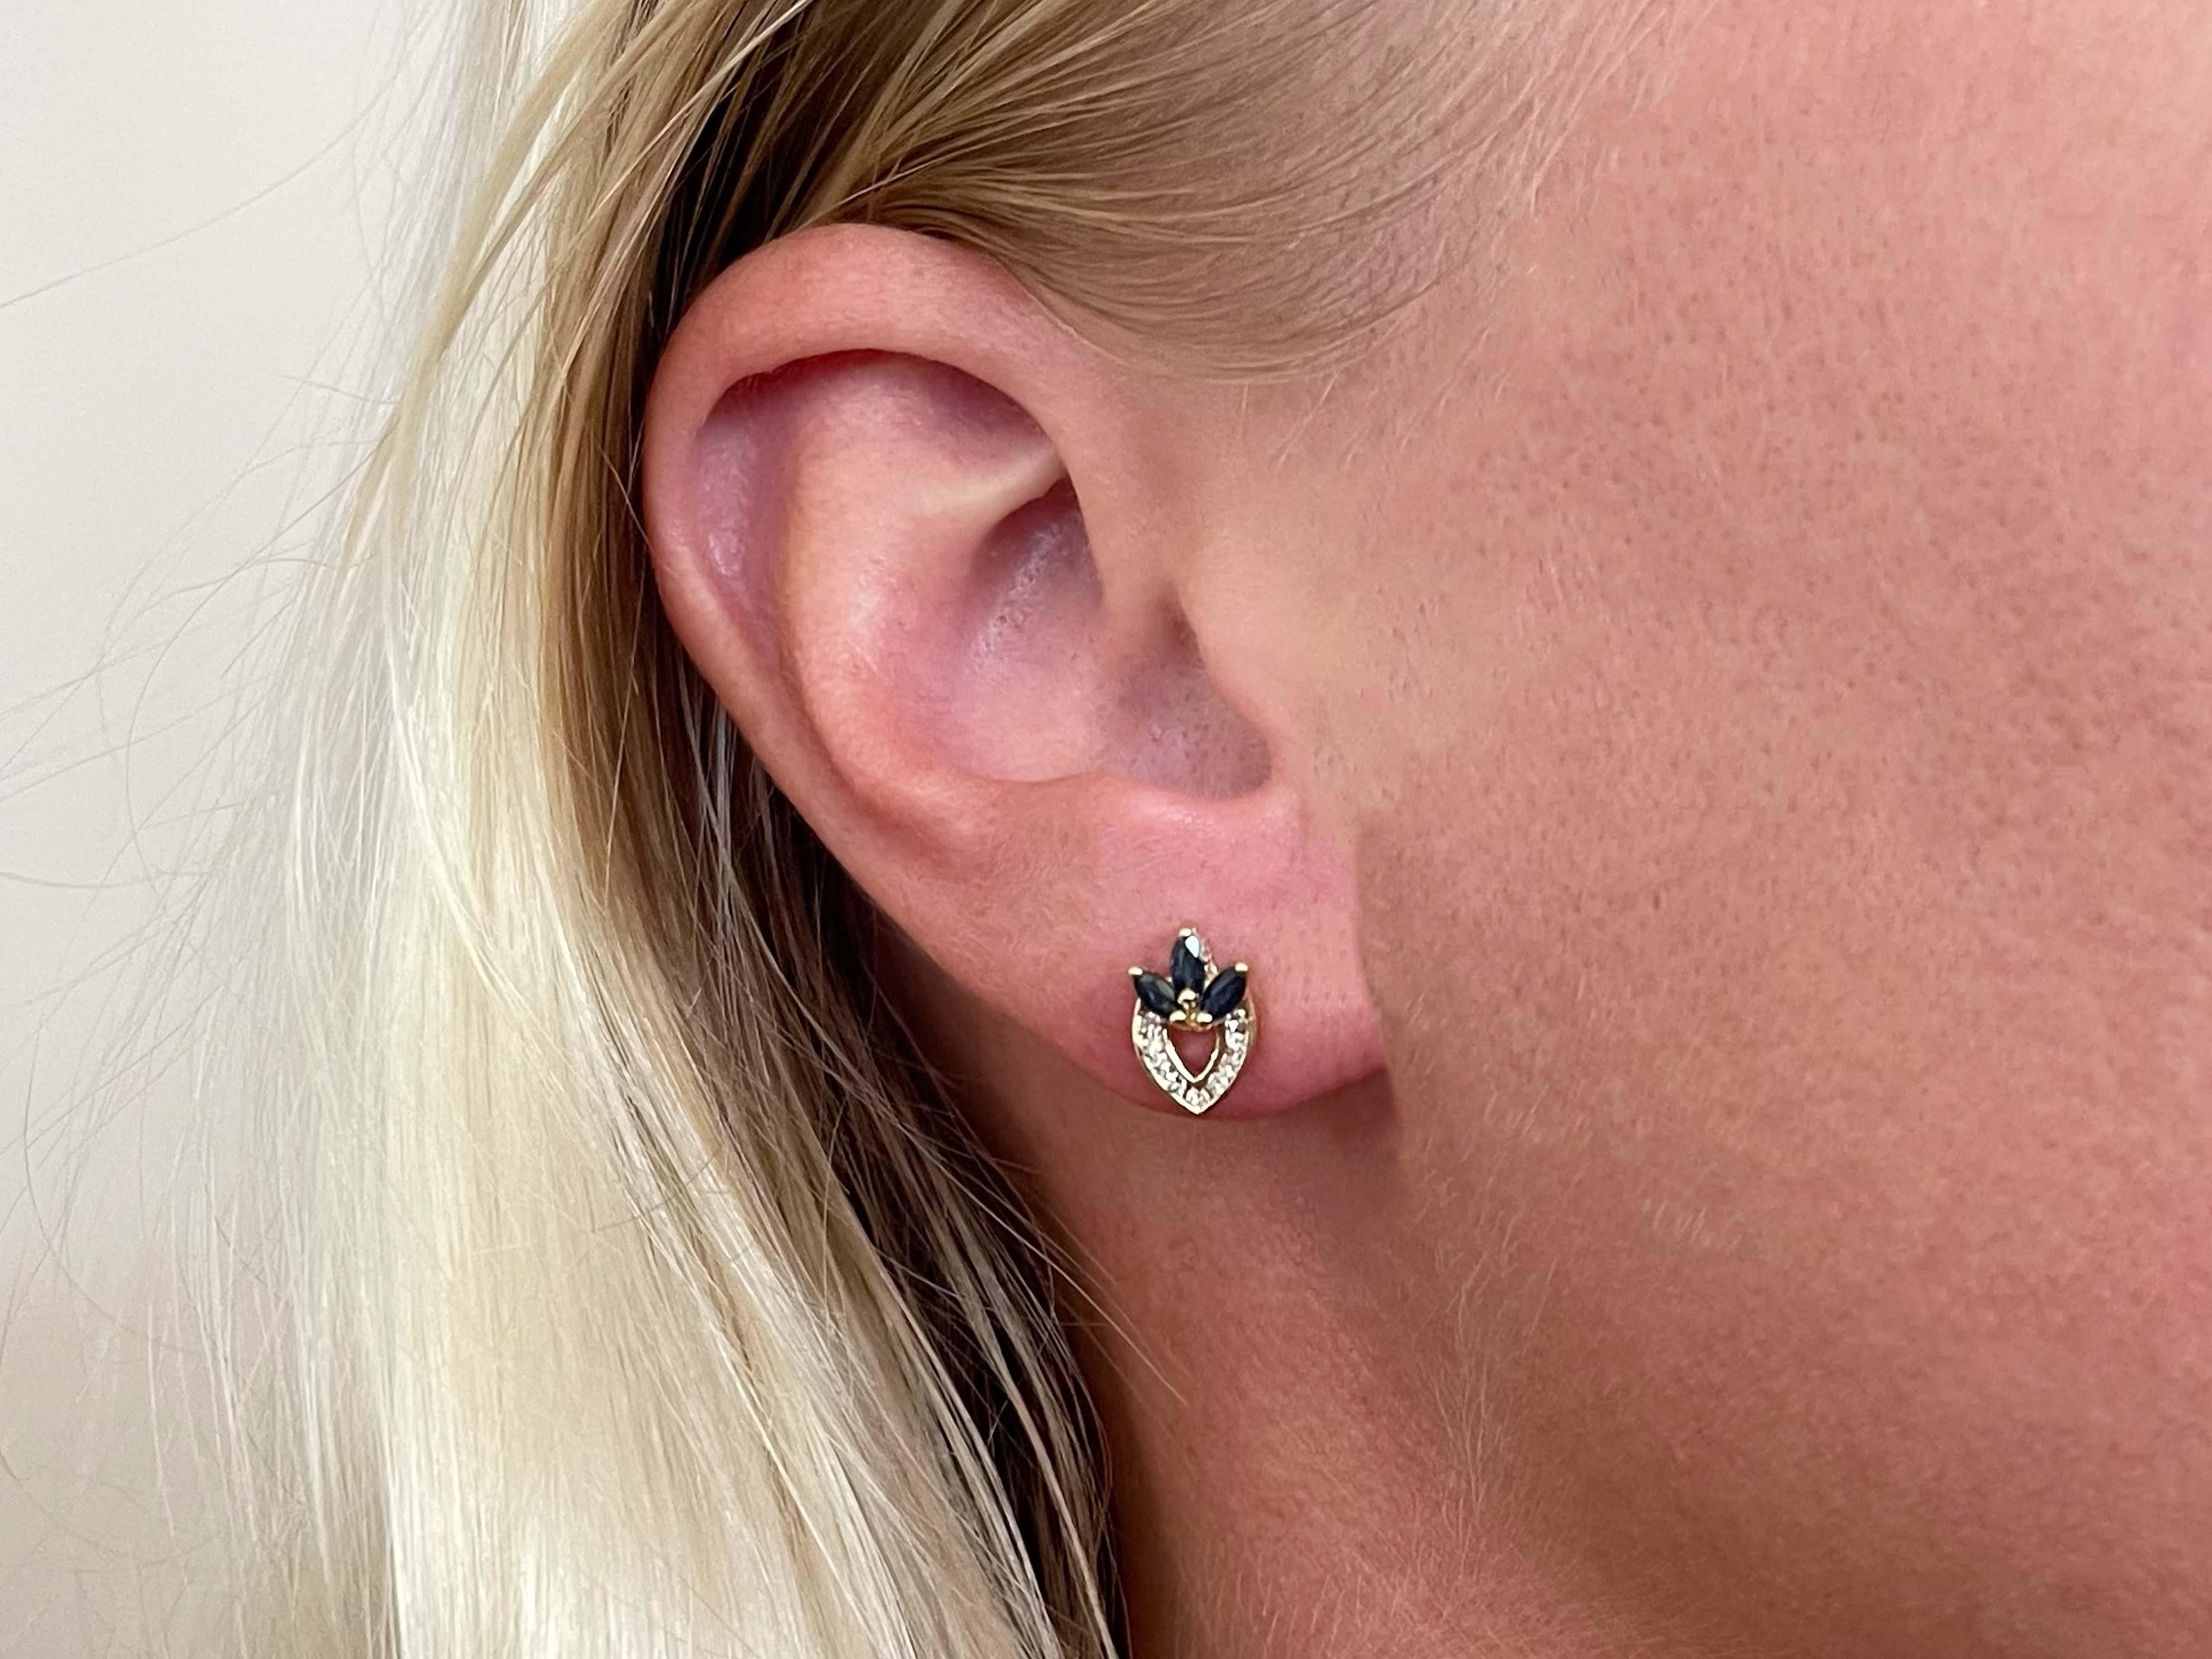 Earrings Specifications:

Metal: 14K Yellow Gold

Total Weight: 2.0 Grams

Gemstone: 6 Sapphires
​
​Sapphire Carat Weight: 0.20 carats

Diamond Color: G
​
​Diamond Count: 18  
​
​Diamond Clarity: SI1-SI2 
​
​Diamond Carat Weight:  0.10
Condition: